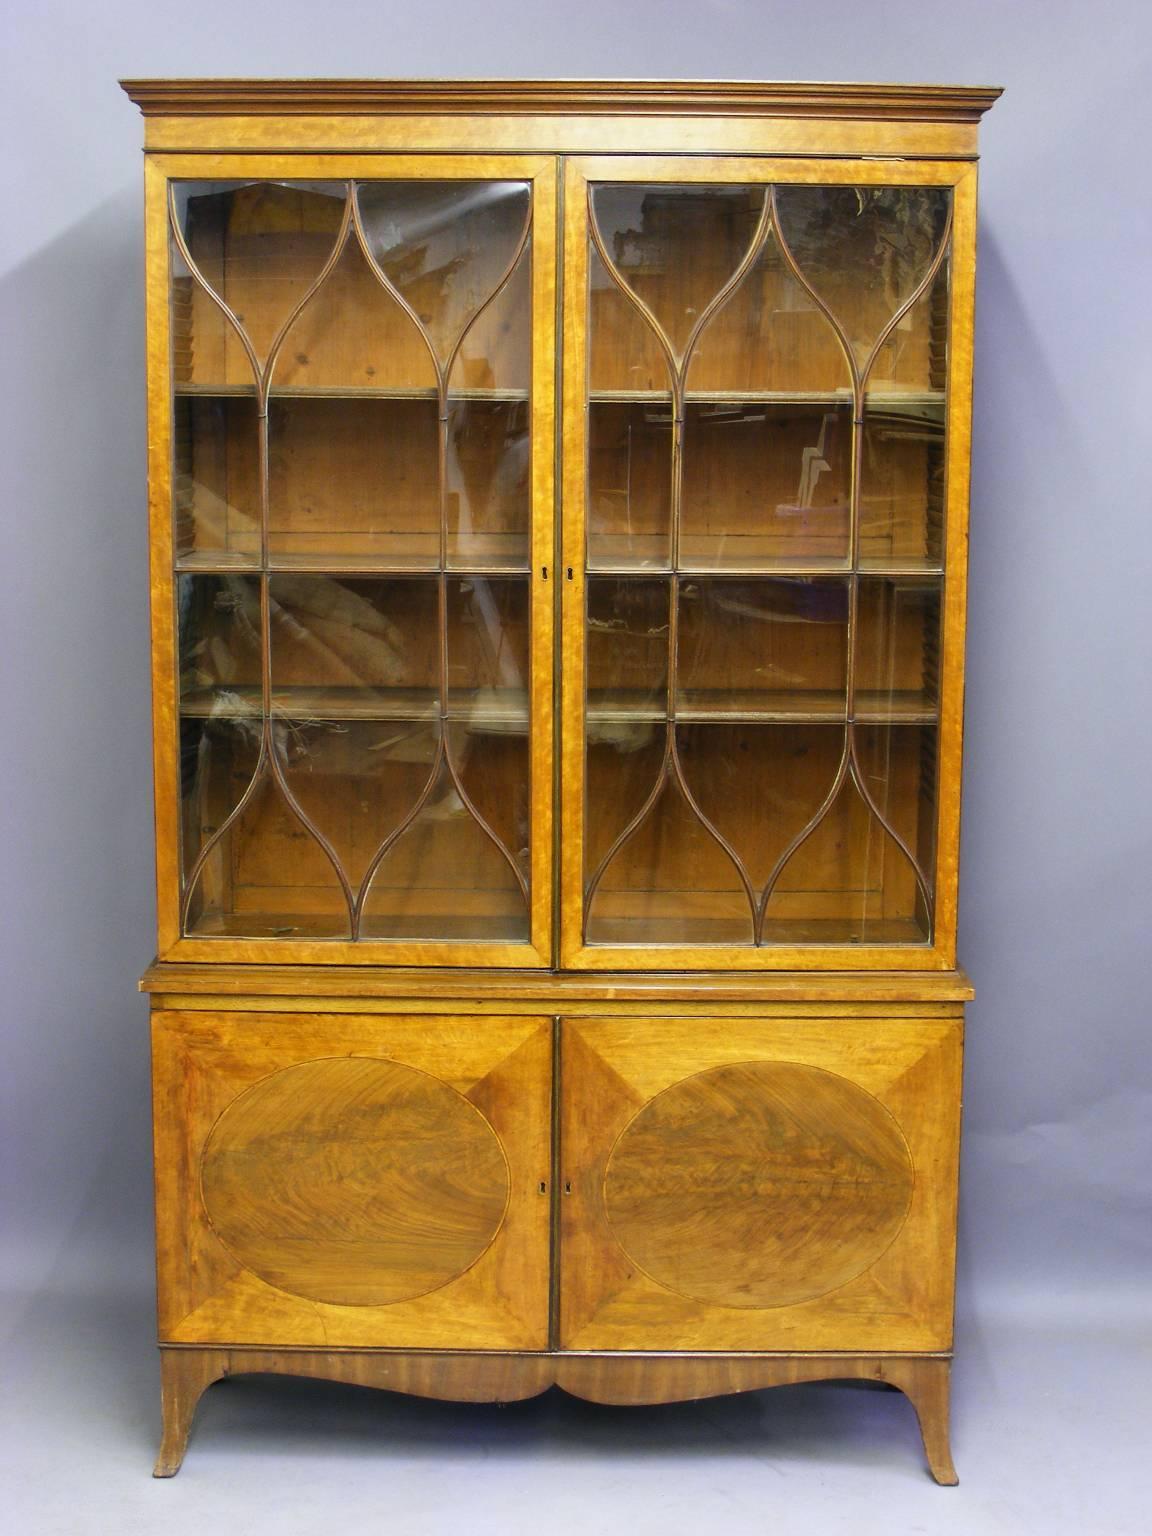 An antique Sheraton satinwood and mahogany display cabinet. The beautifully shaped astragal doors enclose adjustable shelving. The doors of the lower section are inset with flame mahogany panels. The whole is raised upon outswept bracket feet, circa